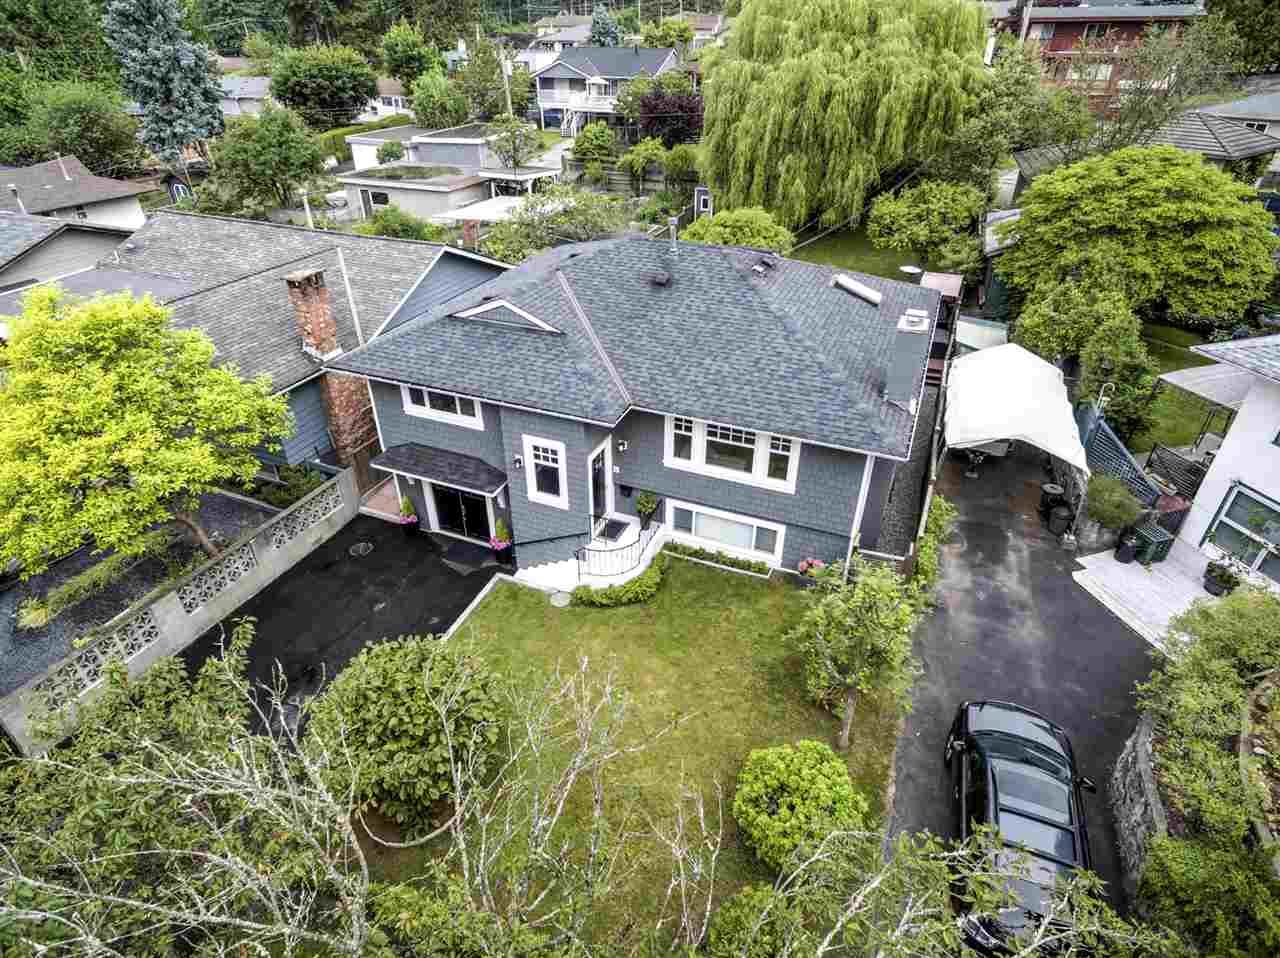 Main Photo: 506 W 19TH STREET in : Central Lonsdale House for sale (North Vancouver)  : MLS®# R2376057